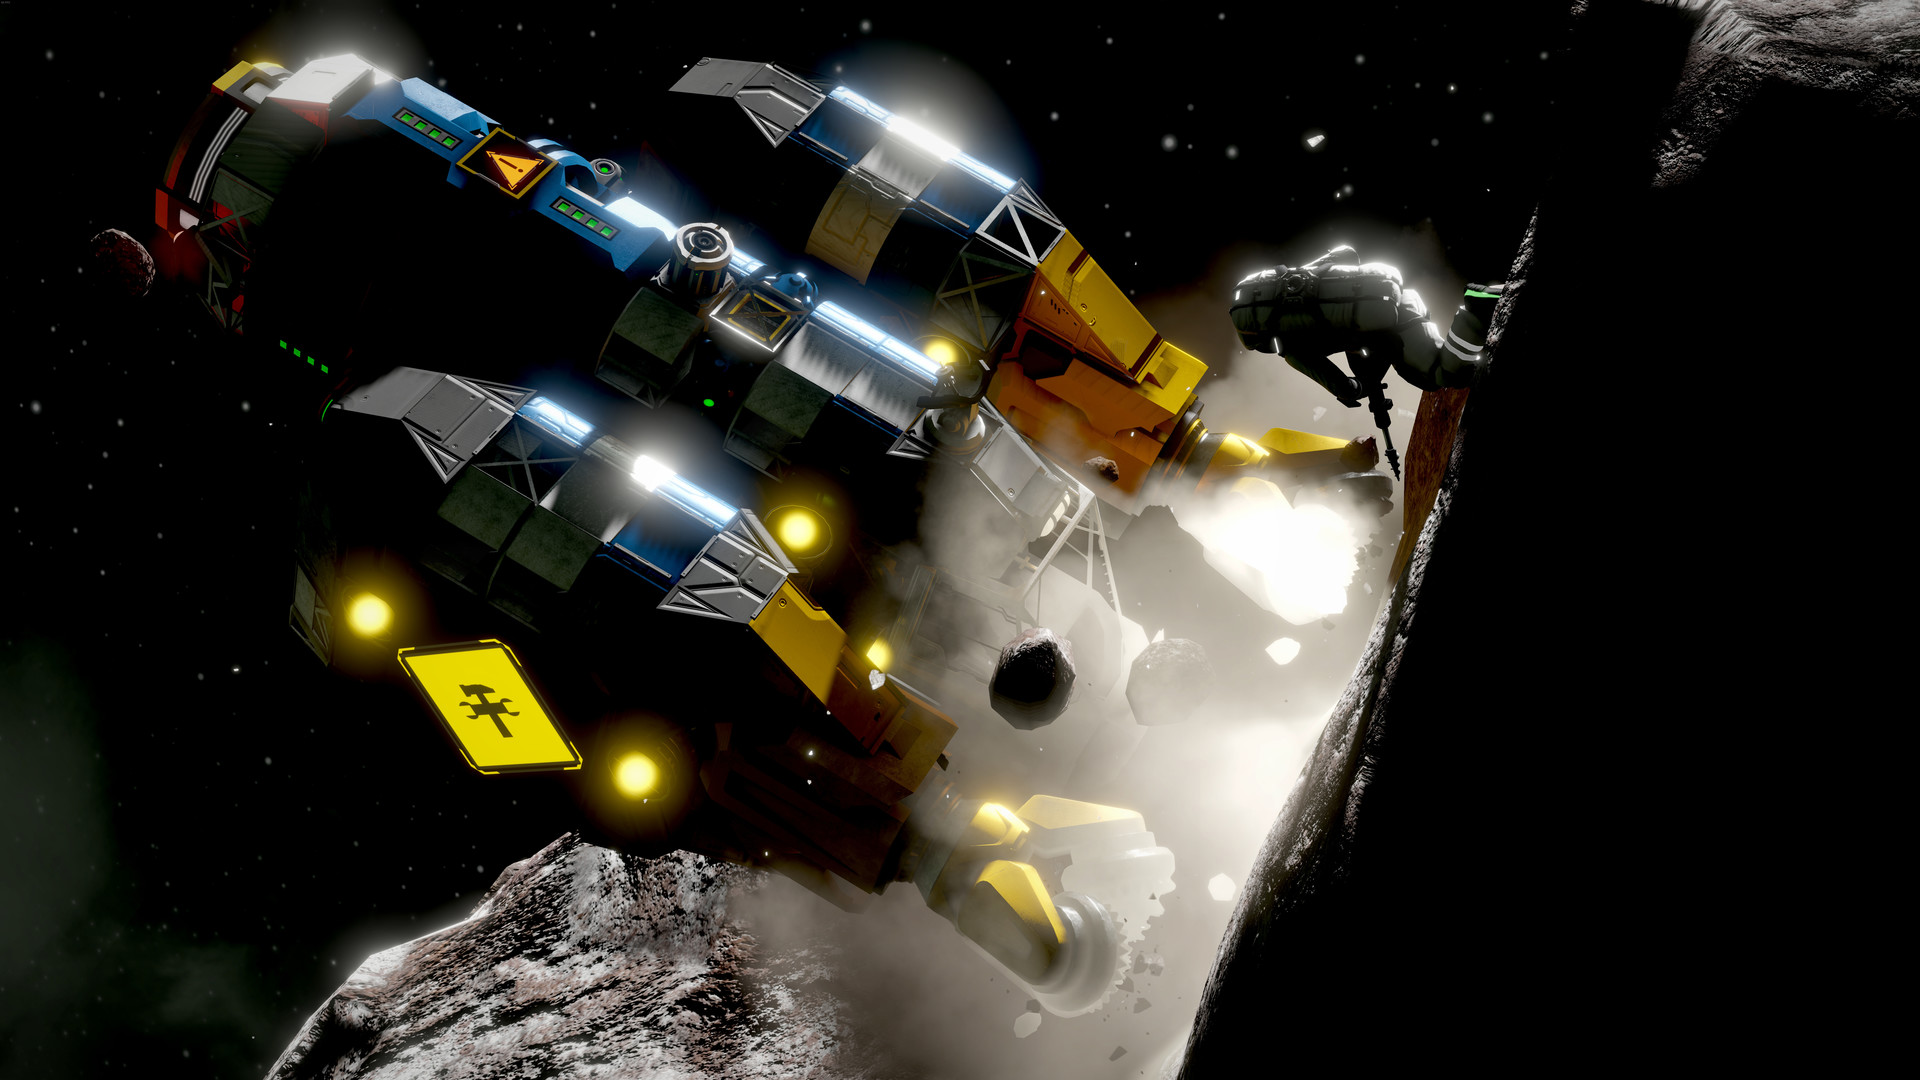 space engineers latest update free download may 2019